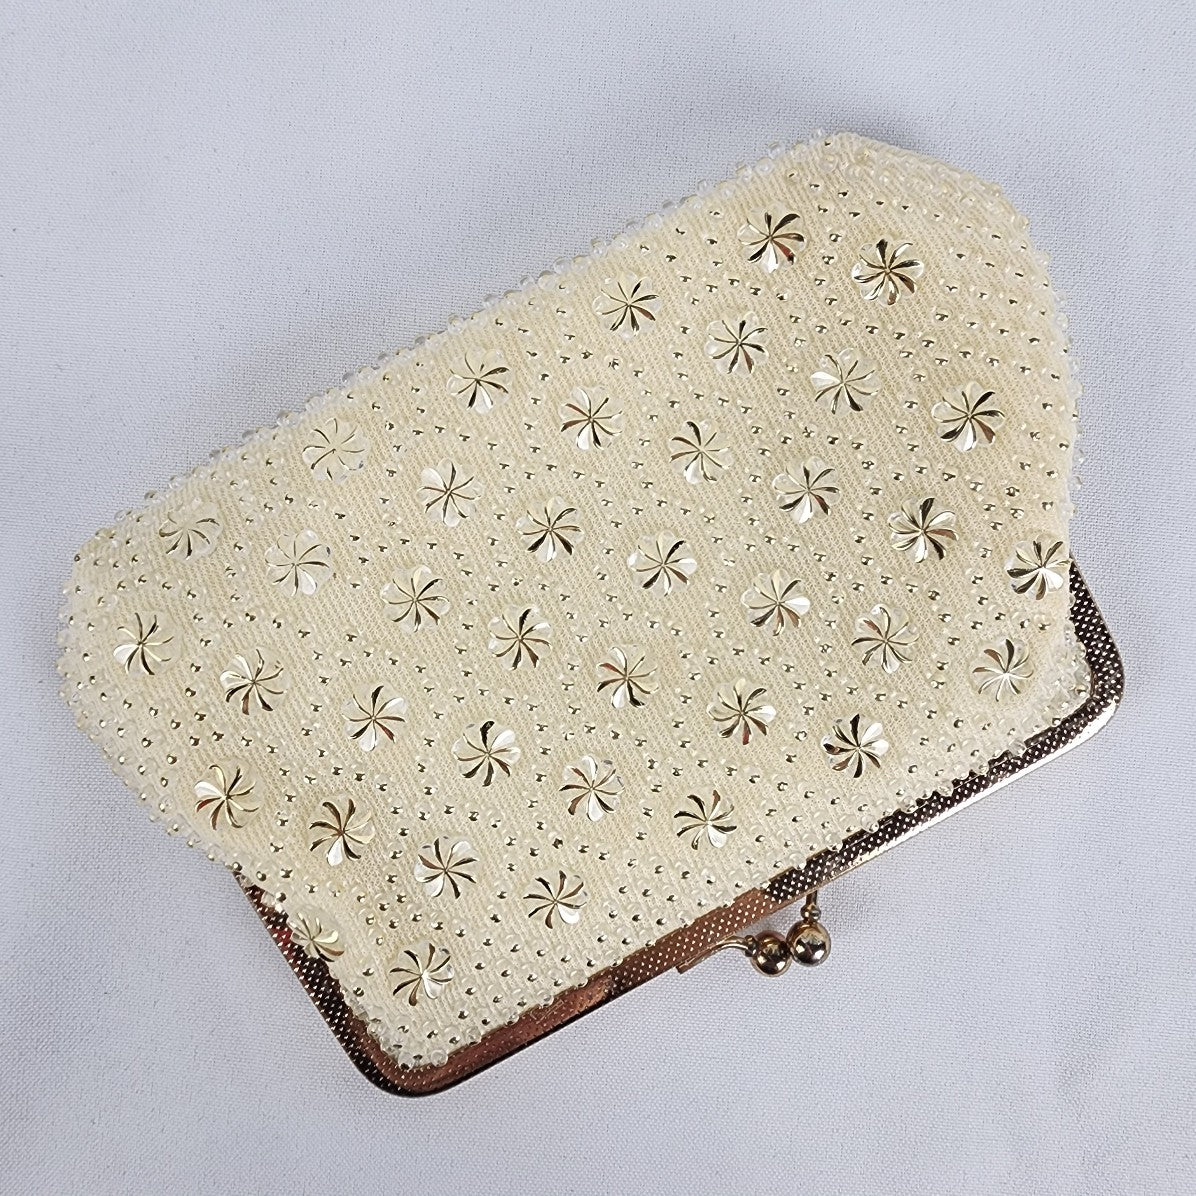 Vintage Gold Tone Floral Beaded Clutch Purse